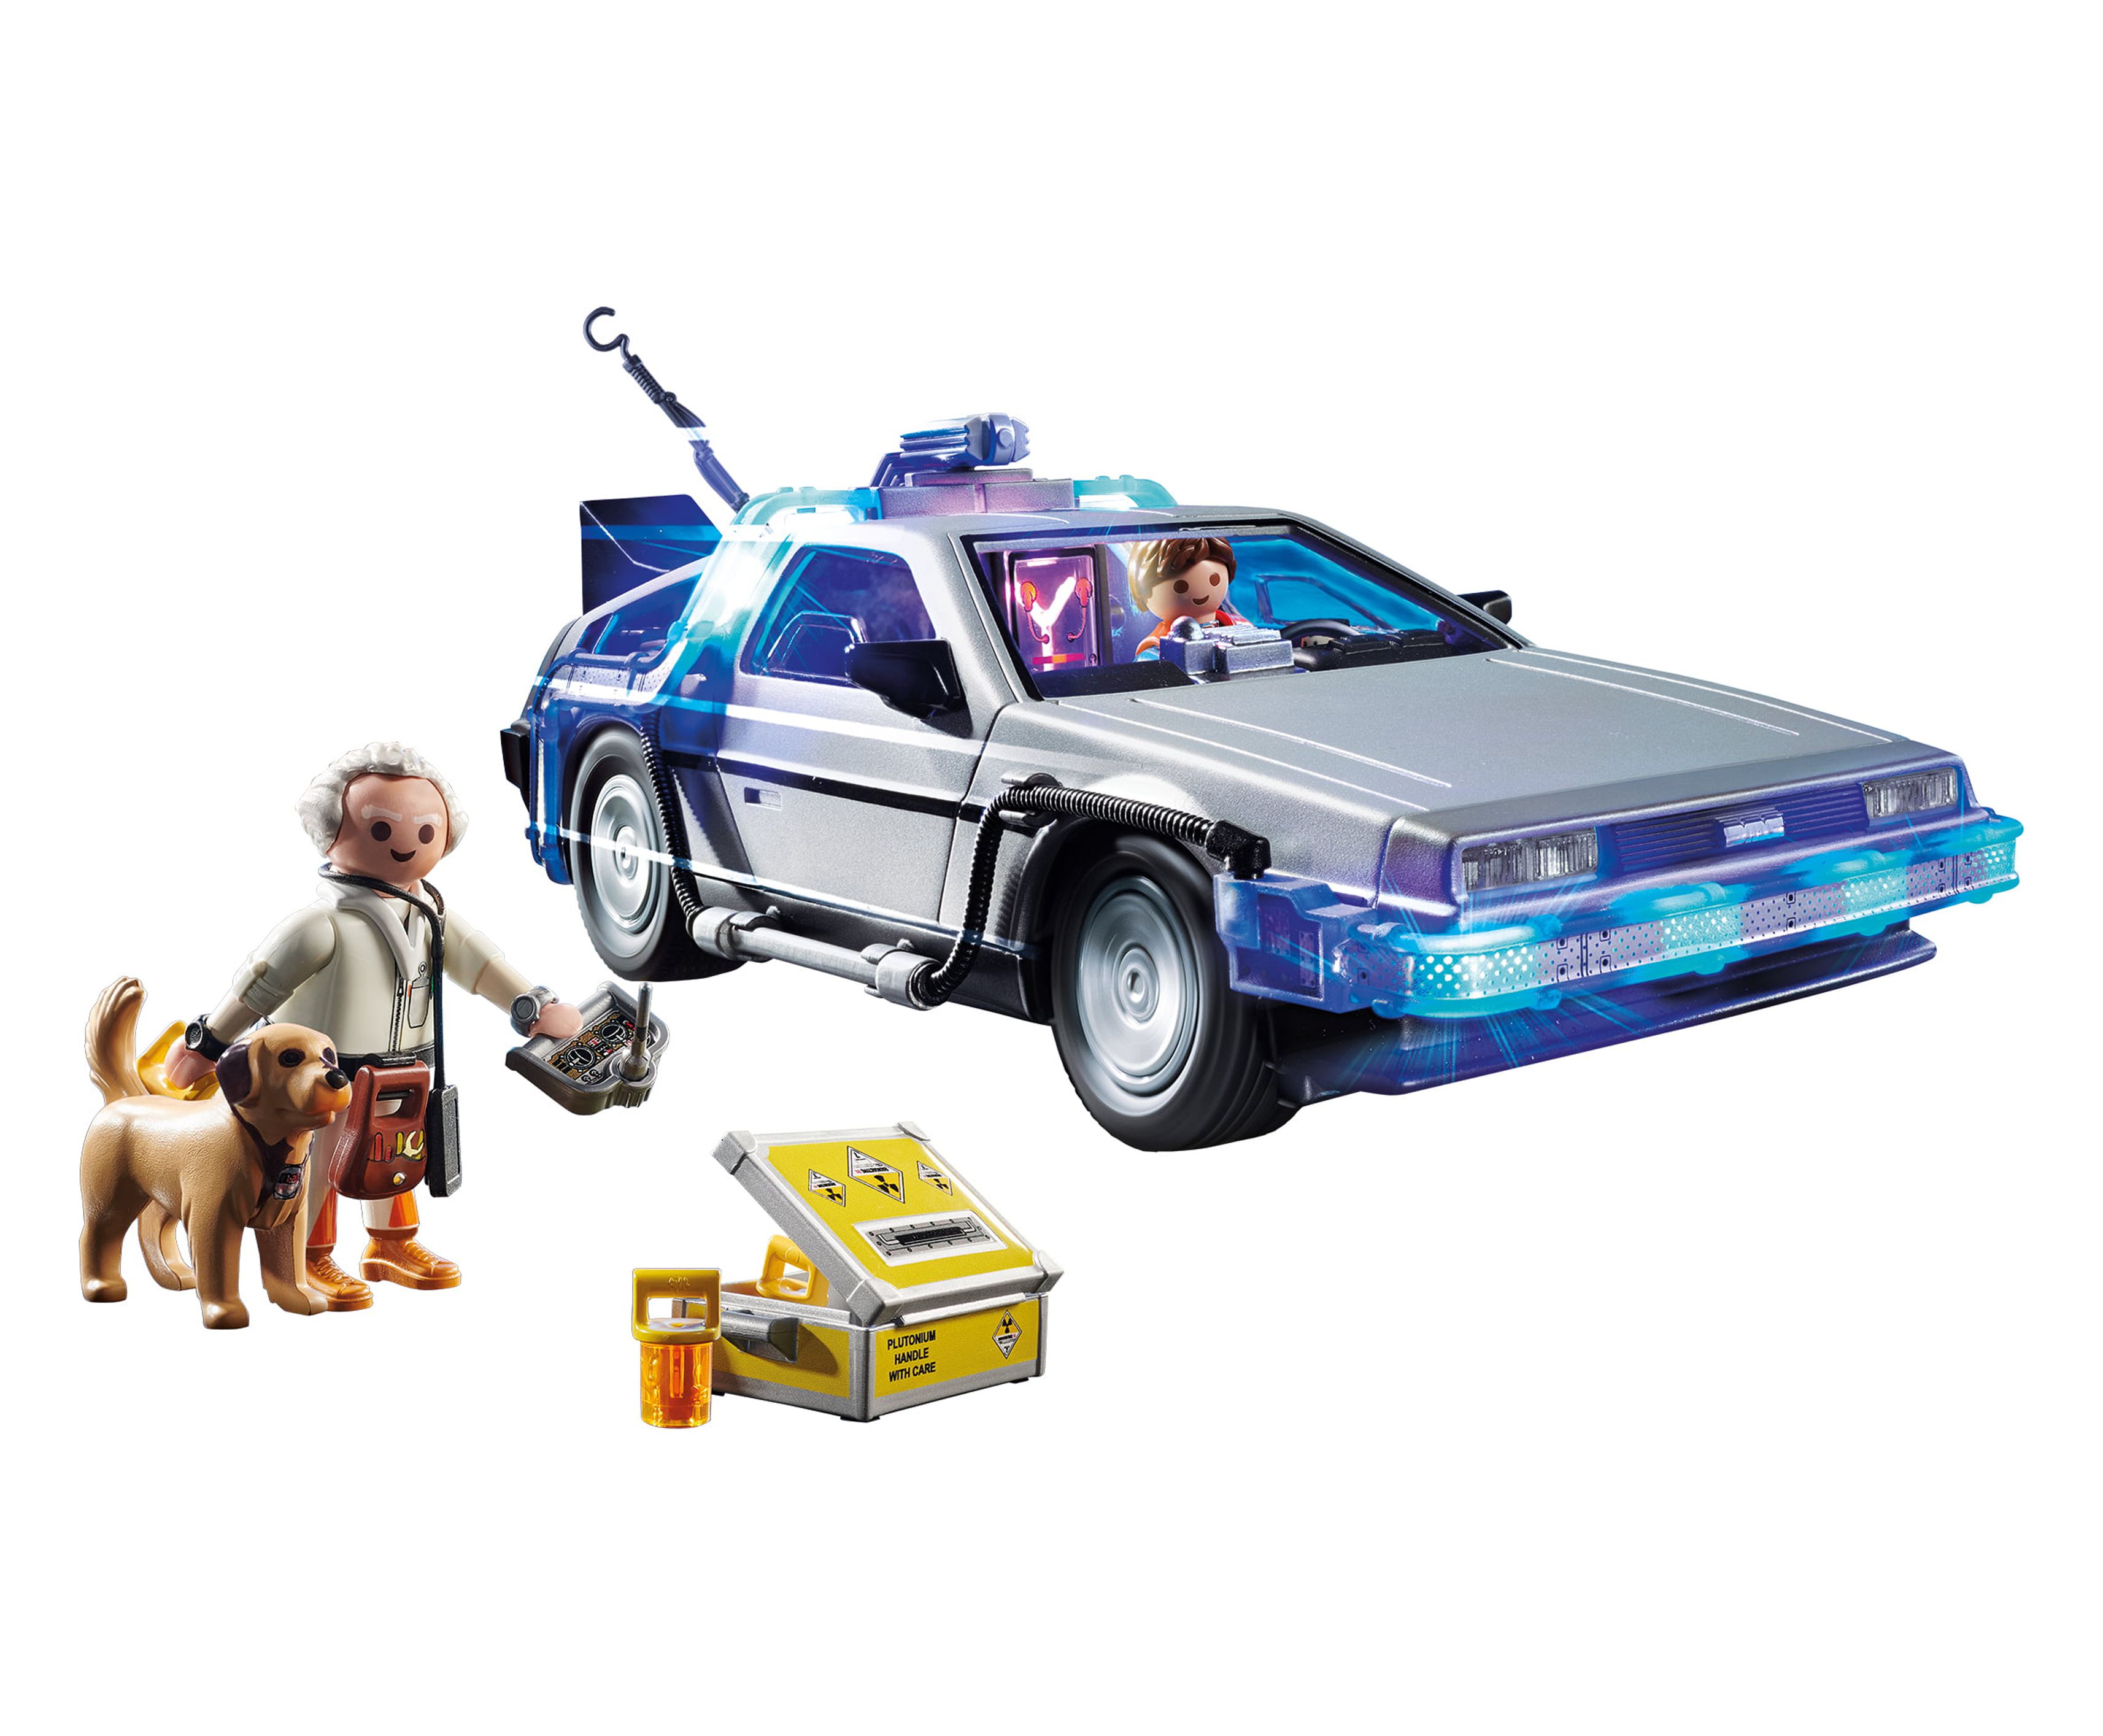 PLAYMOBIL Back to the Future DeLorean - image 2 of 8